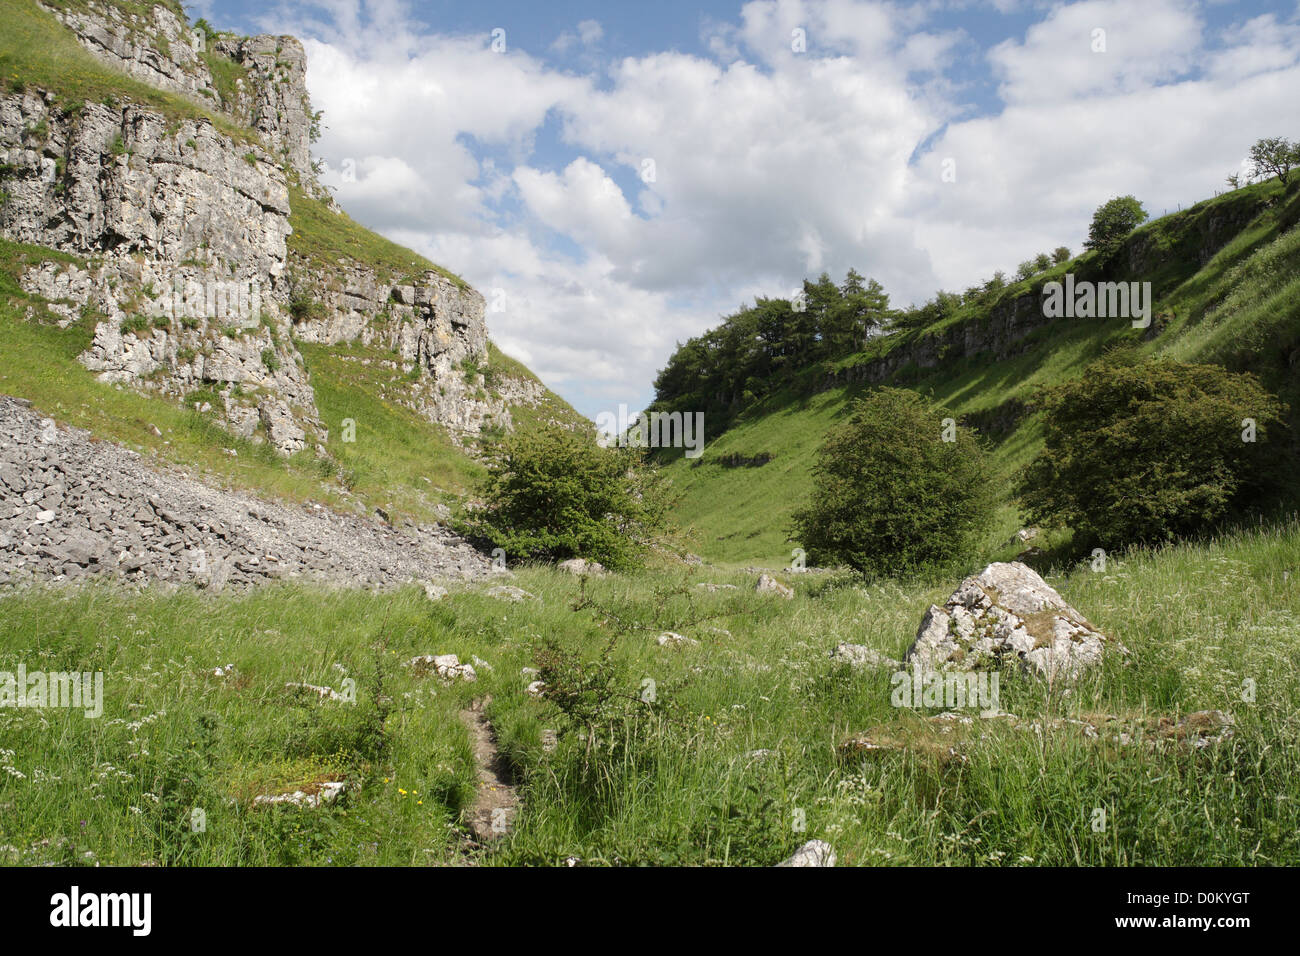 The Upper part of Lathkill Dale in the Derbyshire Peak District National Park England UK, English British countryside. Dry limestone valley Stock Photo